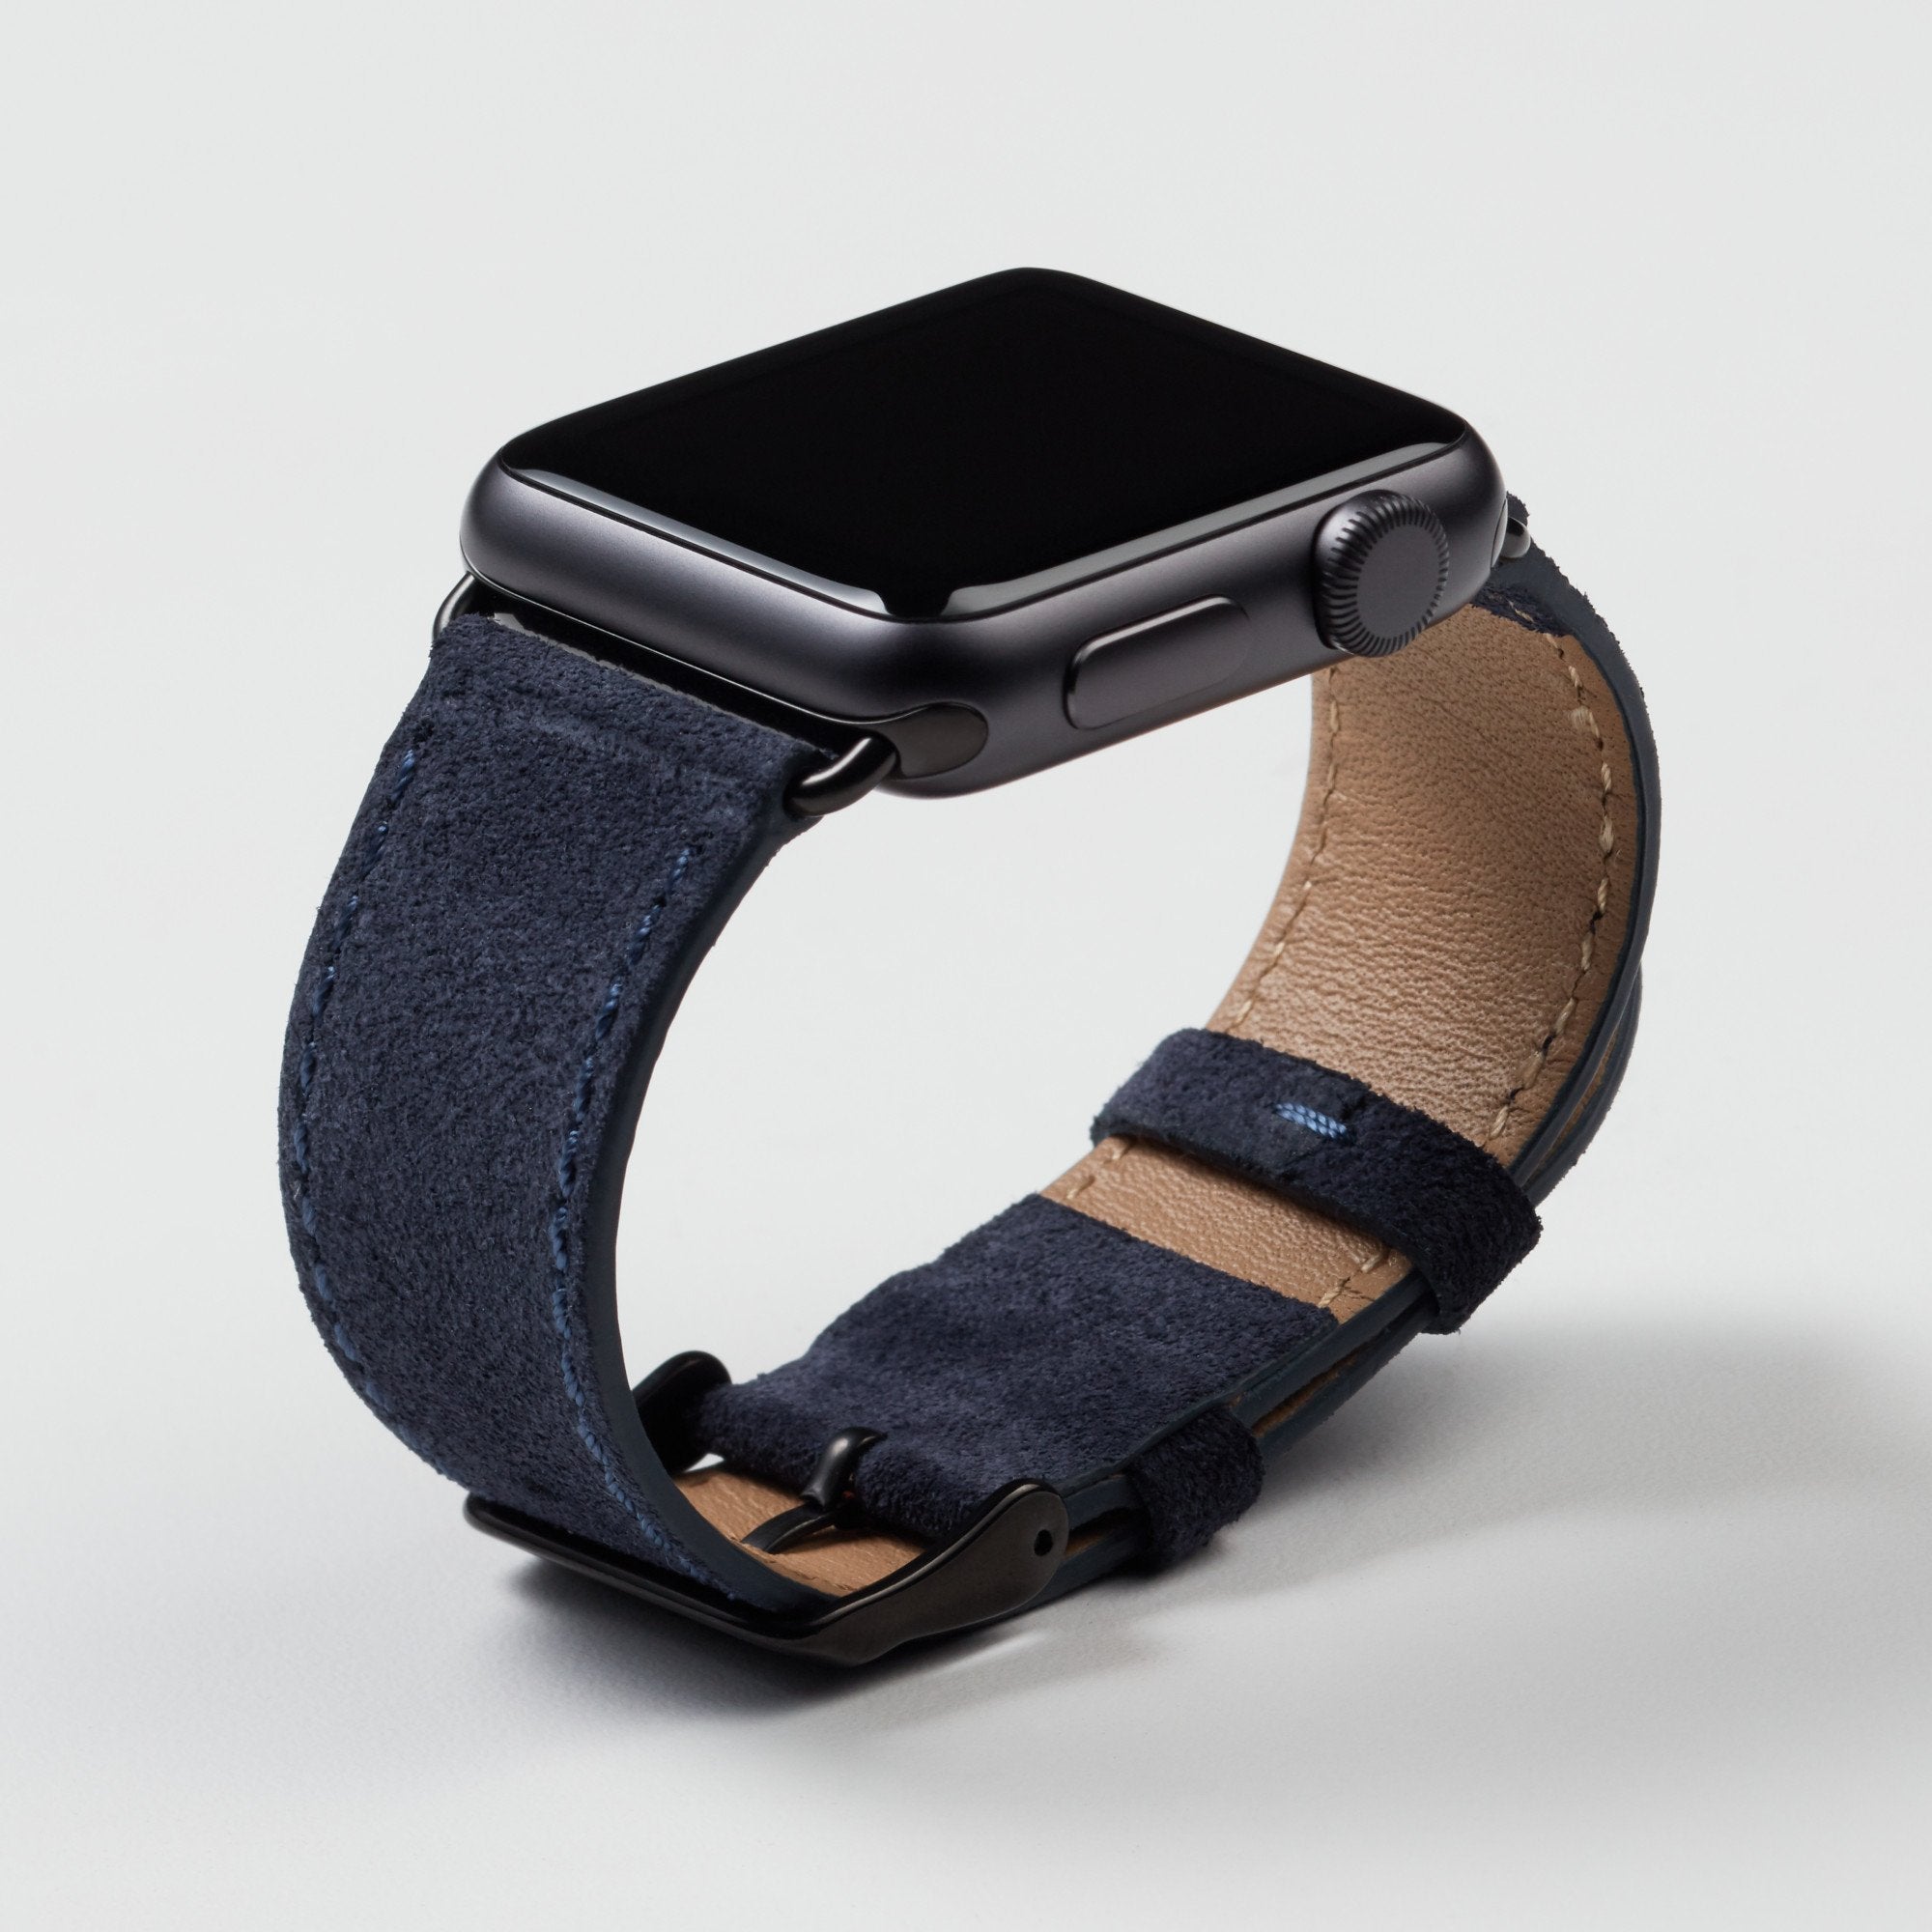 Pin and Buckle Apple Watch Bands - Velour - Suede Leather Apple Watch Band - Azure Blue - Black